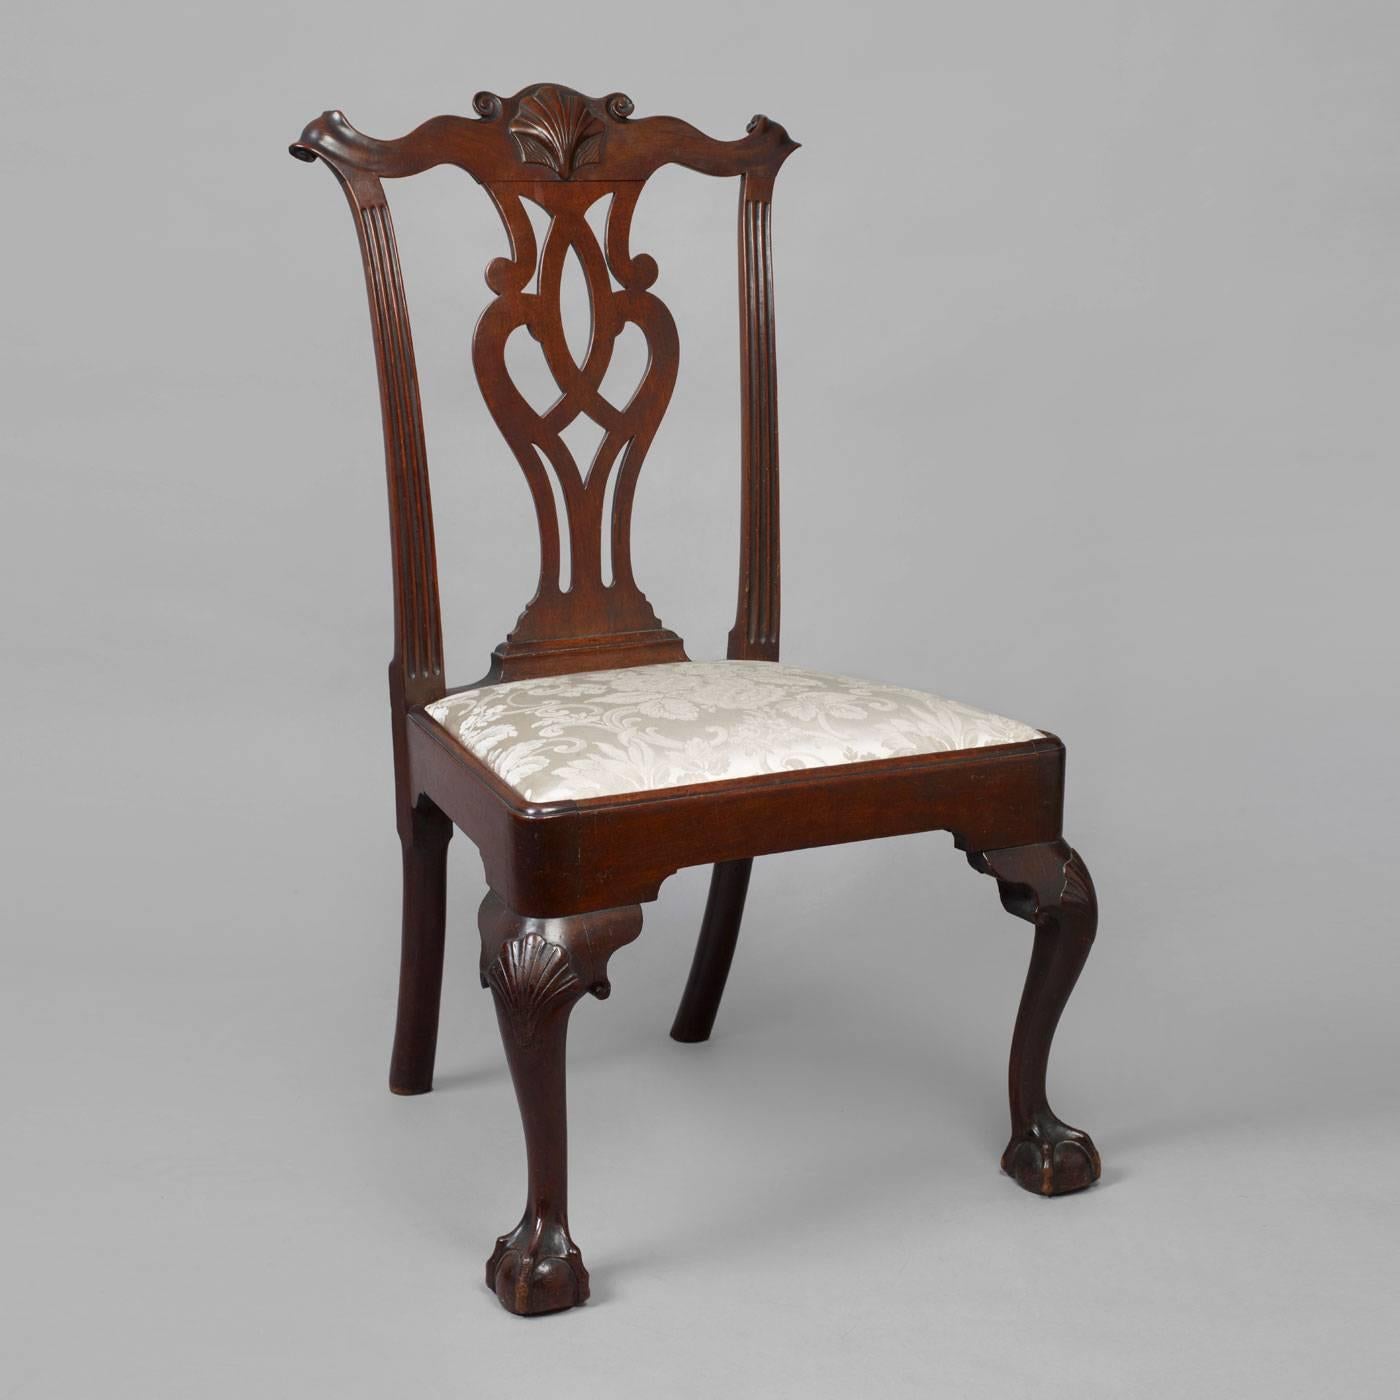 Philadelphia, ca. 1765-1780.
Mahogany, pine seat frame.
A wonderful example having a shaped, carved crest rail with a shell flanked by volutes and swept back ears above a carved pierced splat flanked by fluted stiles and a trapezoid slip-seat